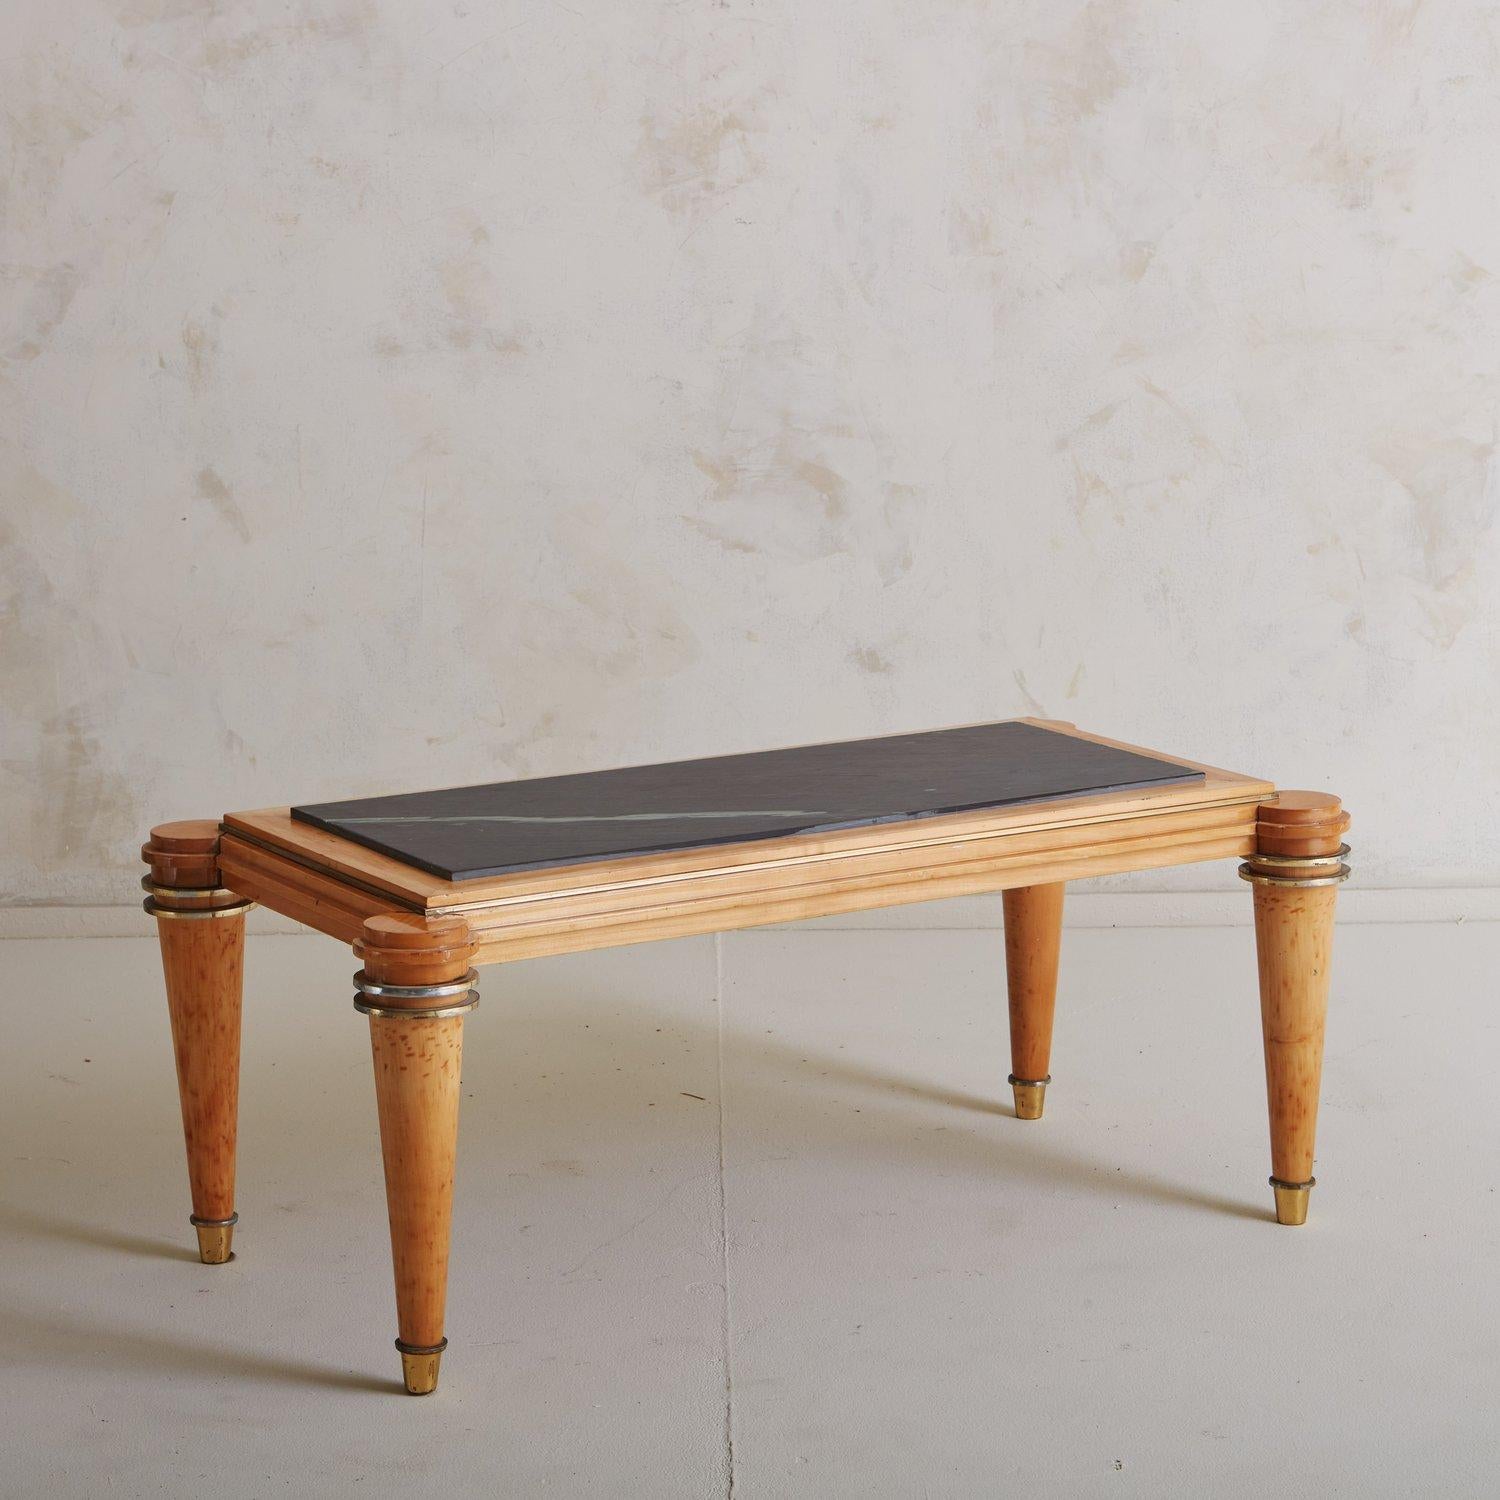 A 1940s Art Deco coffee table attributed to Etienne Kohlmann. This table has a rectangular wood frame and stands on four round, tapered legs with circular brass detailing and brass feet. It has a black stone tabletop that sits just above the wood